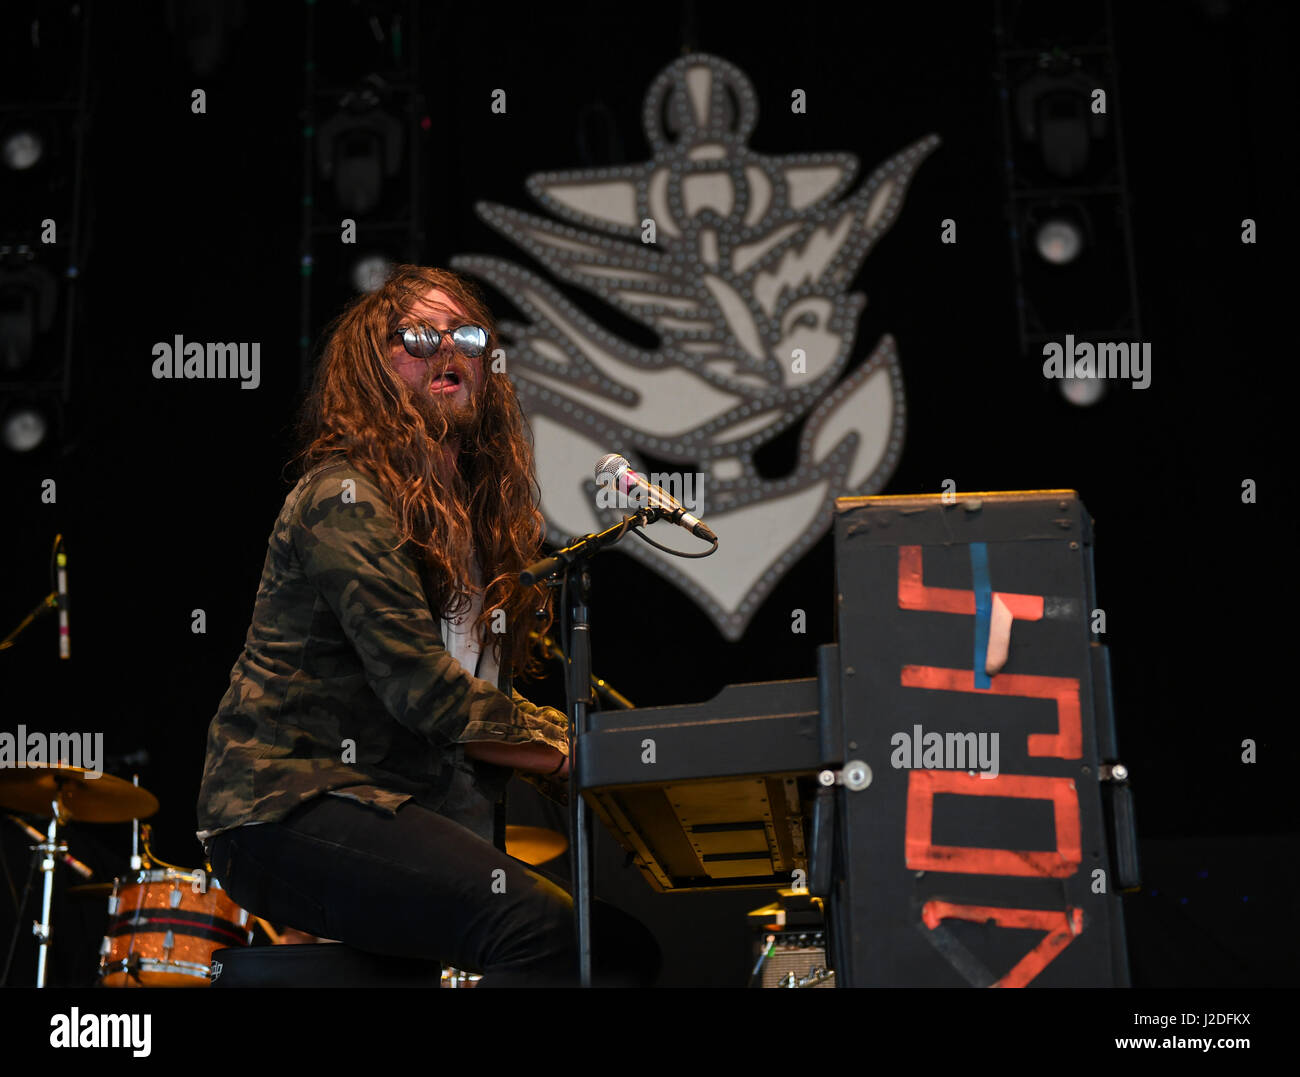 Portsmouth, VIRGINIA, USA. 25th Apr, 2017. J. RODDY WALSTON AND THE BUSINESS, american rock band gets the crowd started at the .to THE PORTSMOUTH PAVILION in PORTSMOUTH, VIRGINIA on 26 APRIL 2017. © Jeff Moore 2017 Credit: Jeff Moore/ZUMA Wire/Alamy Live News Stock Photo